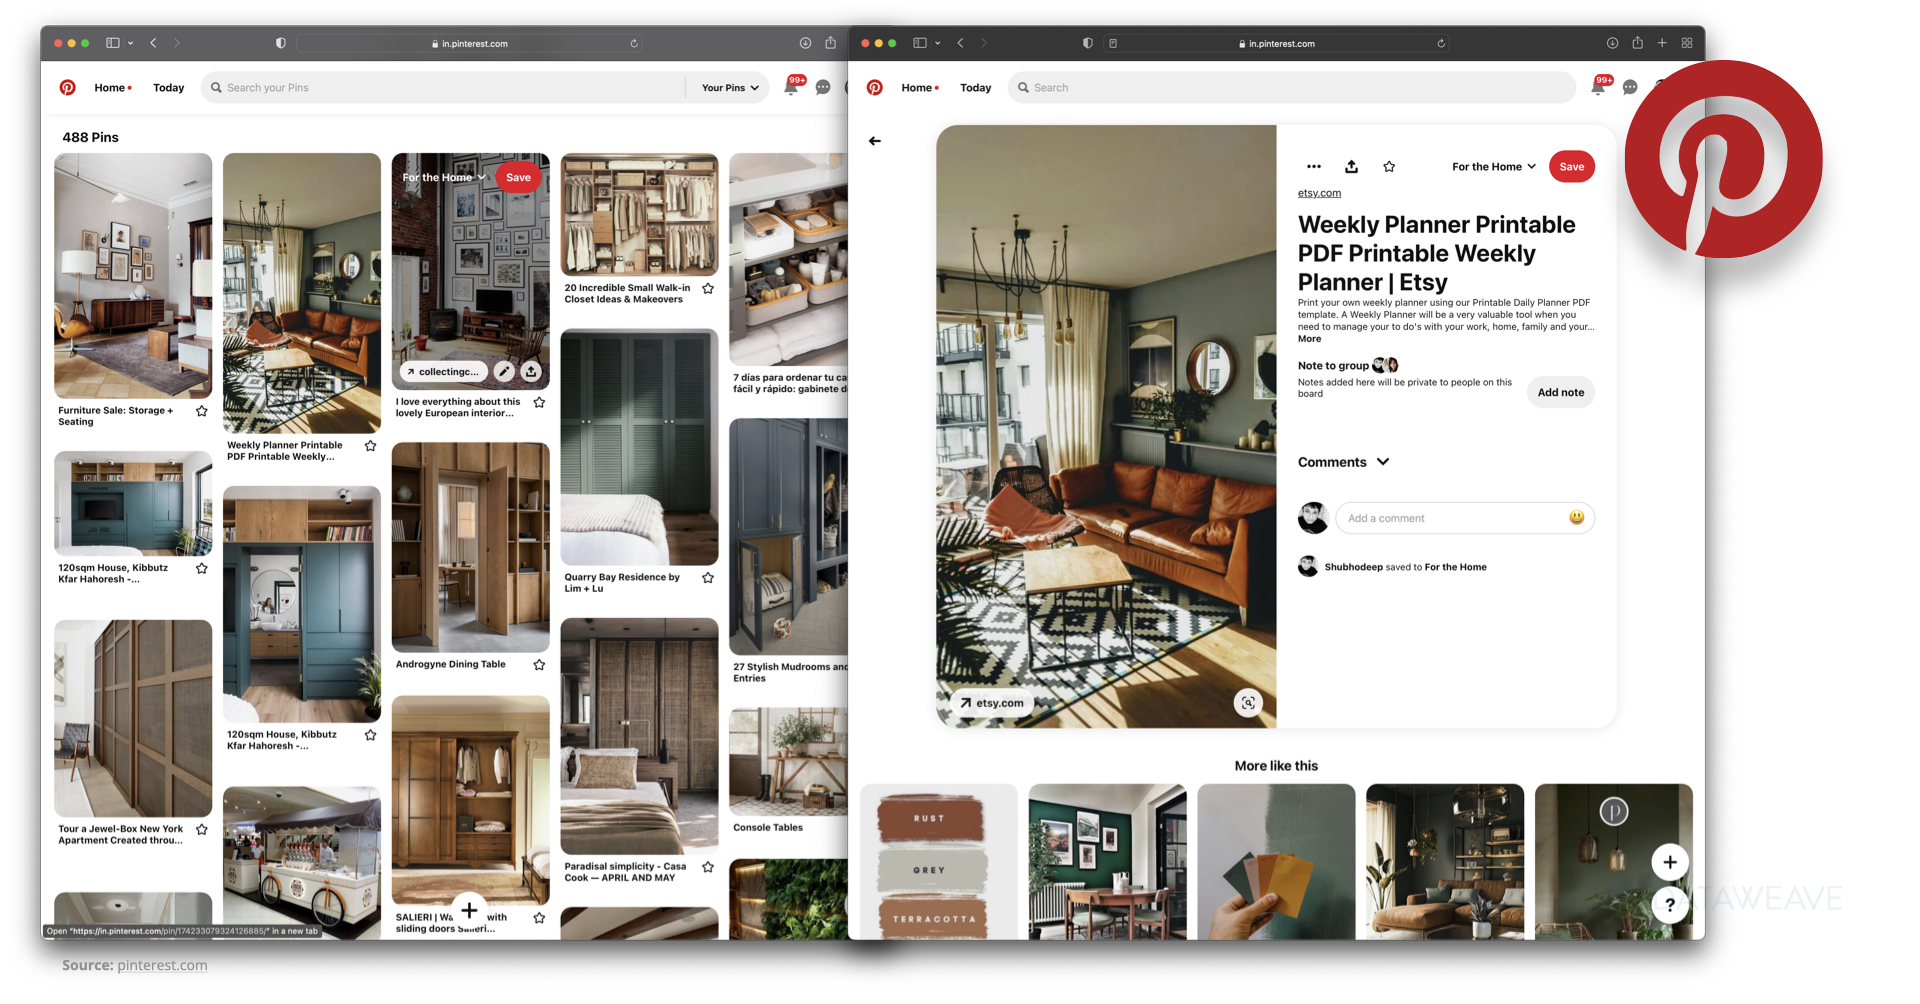 Pinterest is an image-based platform where users create boards